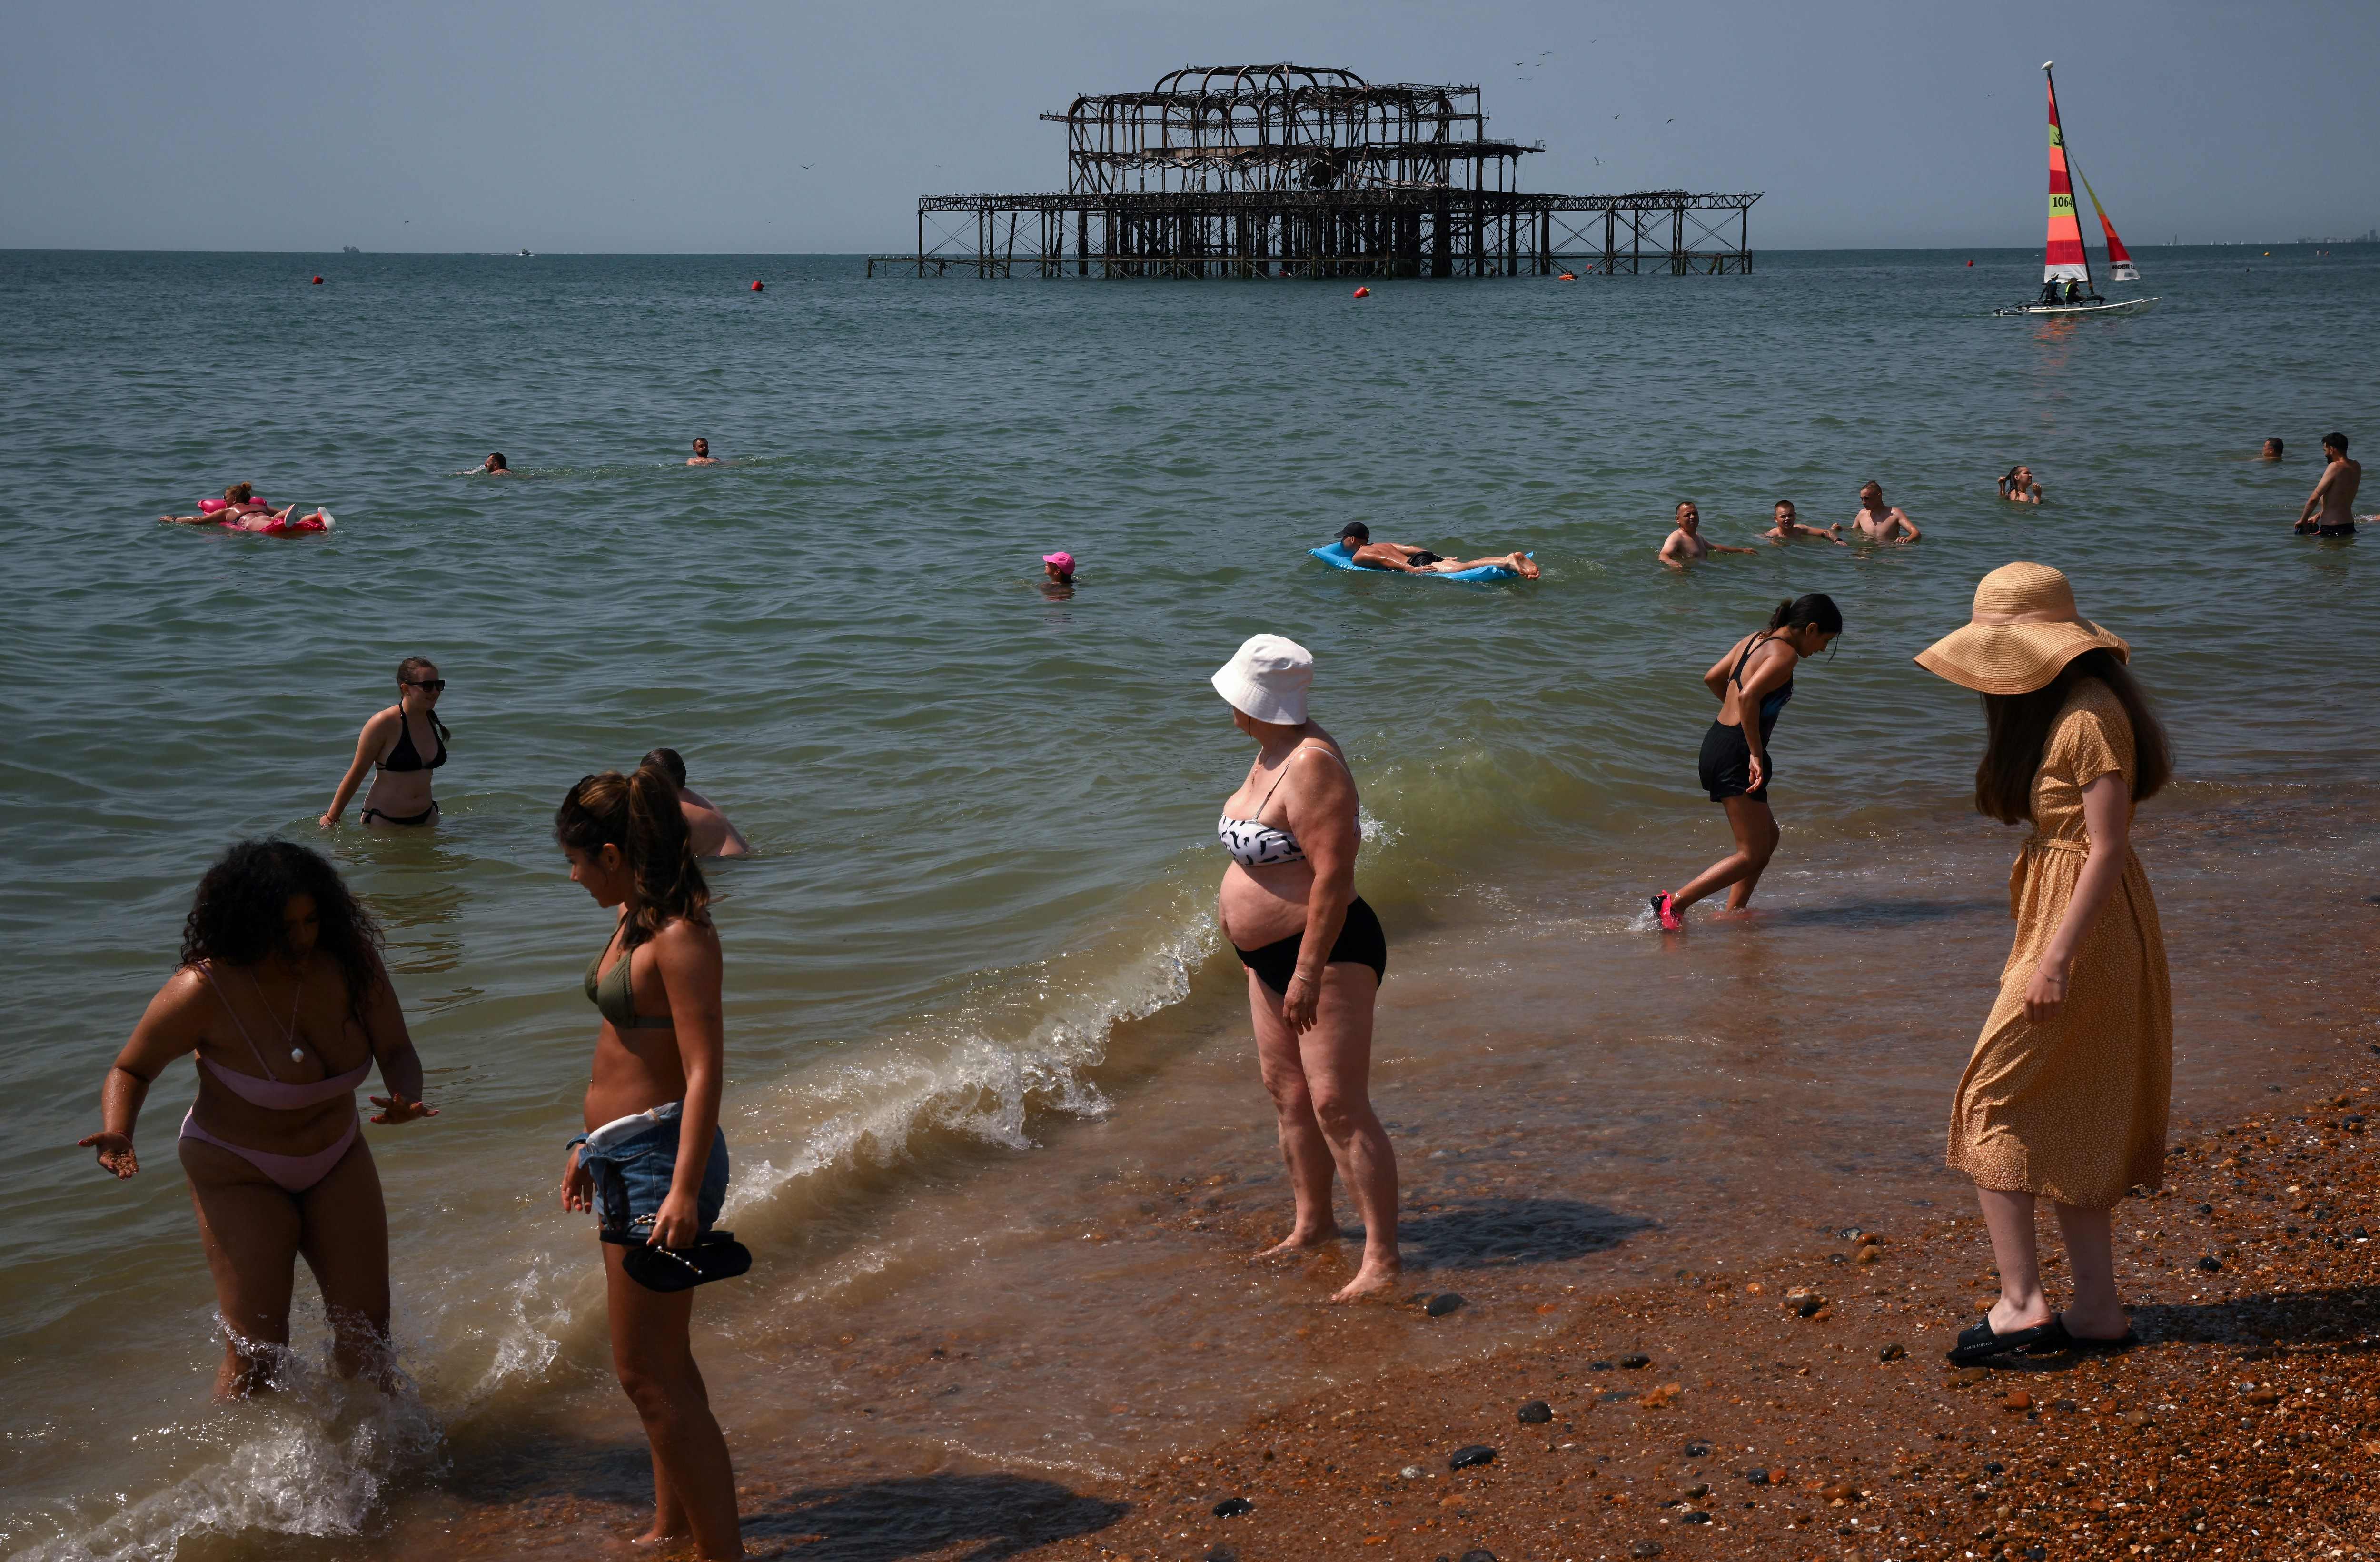 Britain’s beaches are becoming unusable